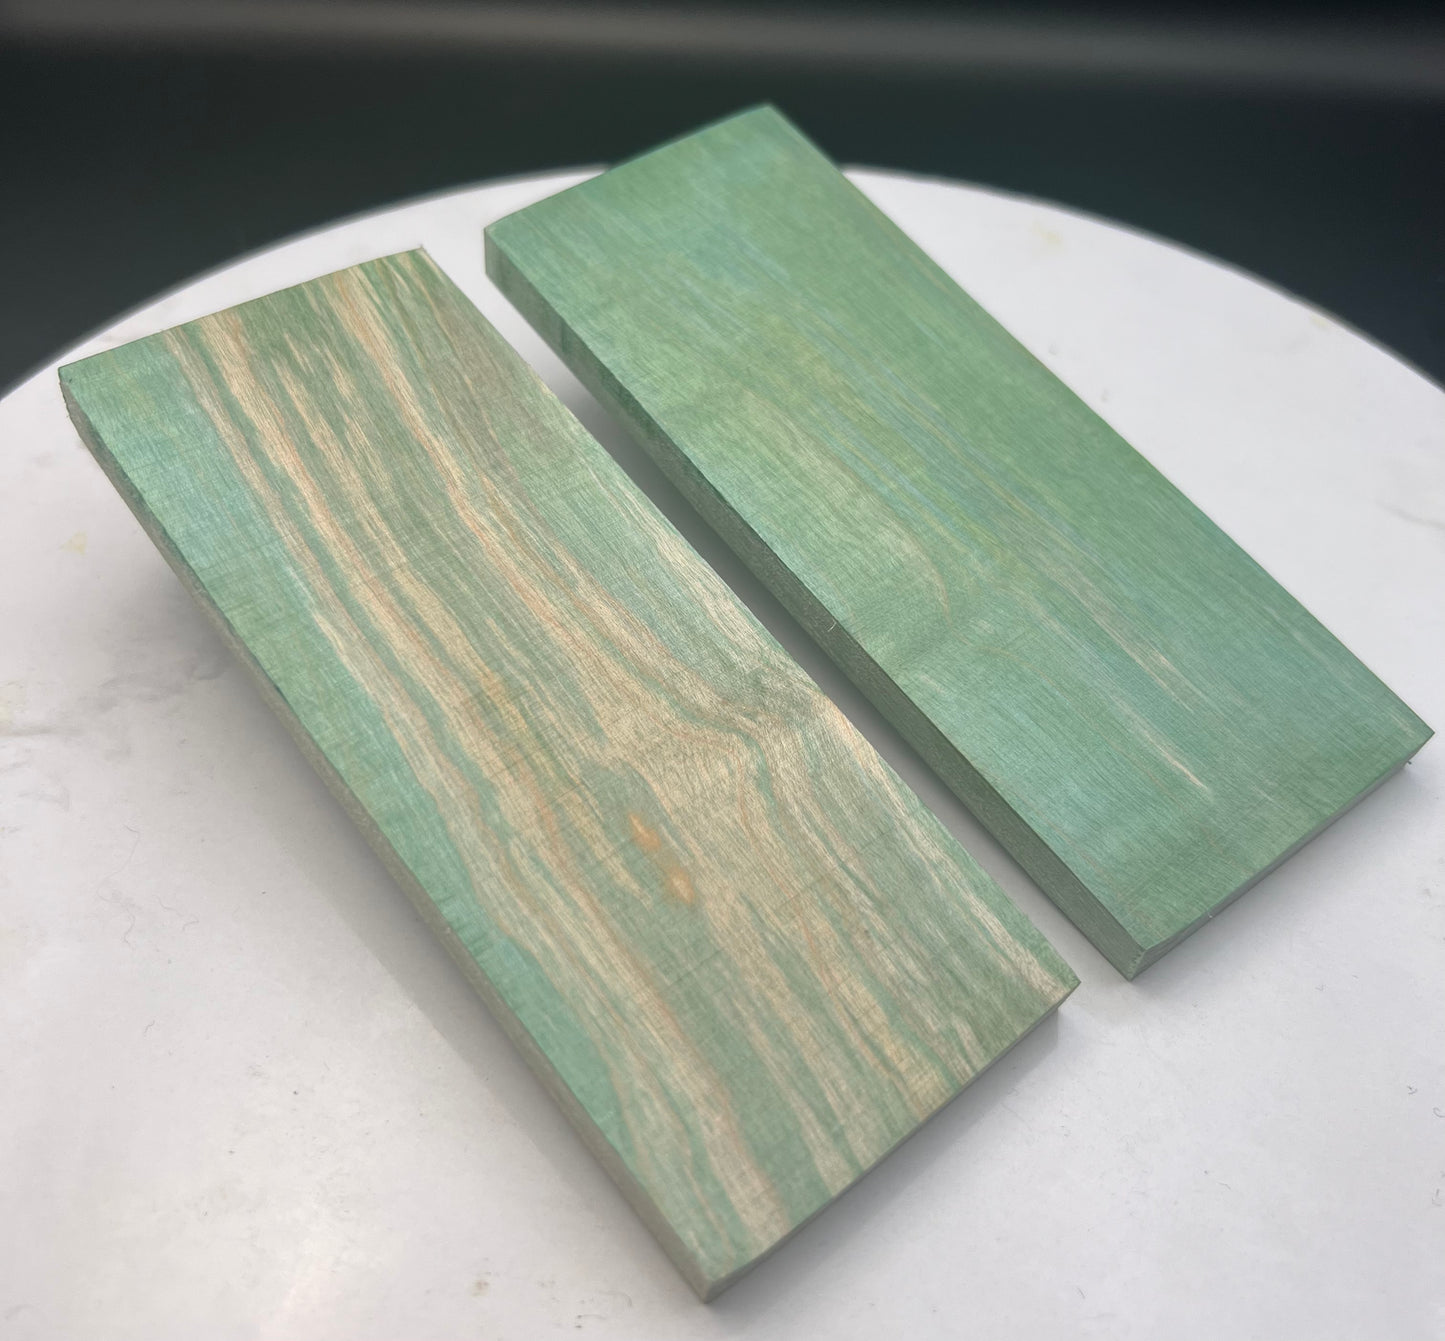 Stabilized Curly Maple knife Scales Emerald Green